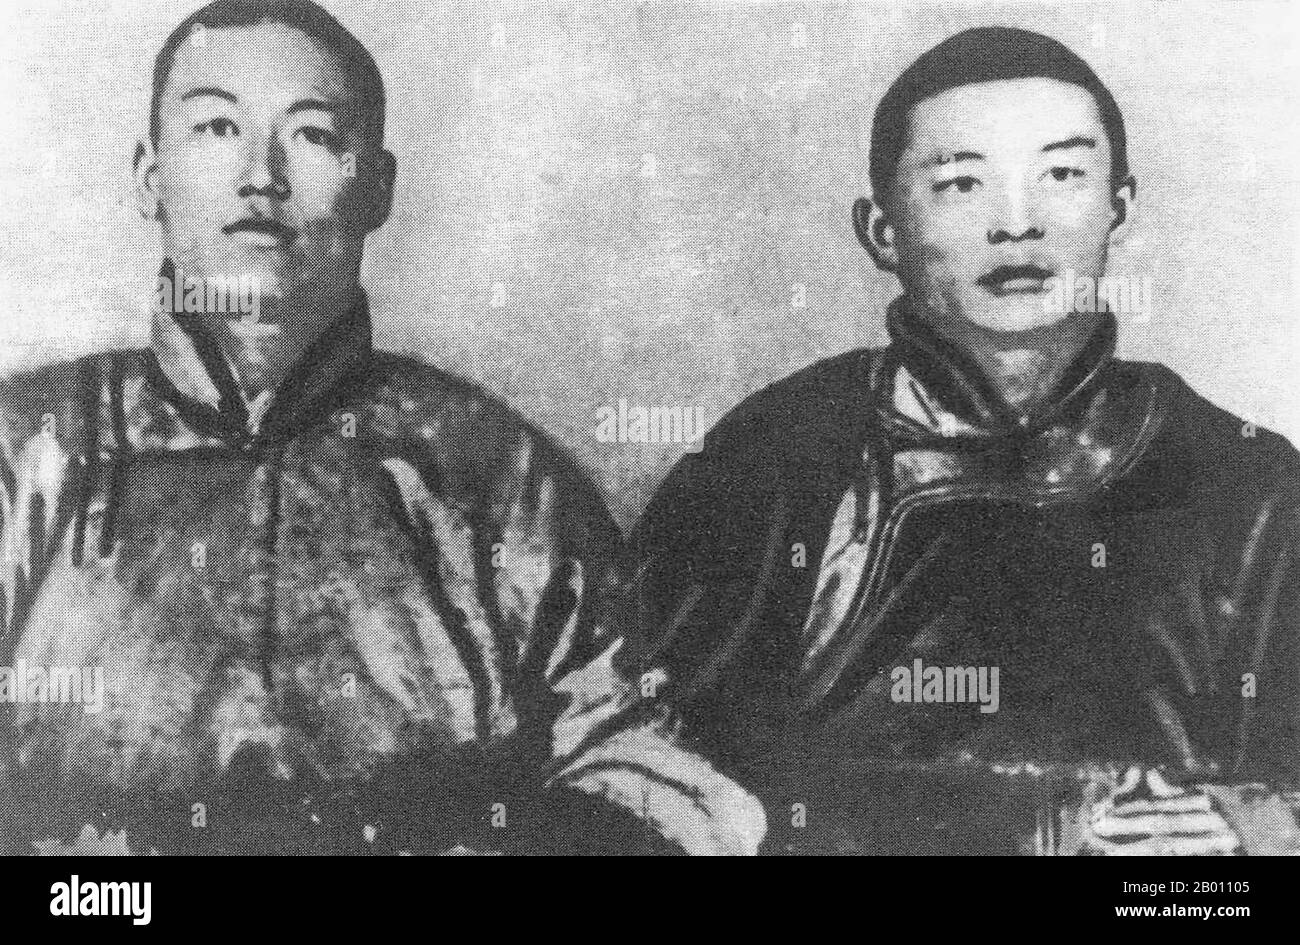 Mongolia: Damdin Sukhbaatar (1893-1923, left) and Khorloogiin Choibalsan (1895-1952, right), Mongolian revolutionary leaders, early 1920s.  Damdin Sukhbaatar (February 2, 1893 - February 20, 1923) was a Mongolian military leader in the 1921 revolution. He is remembered as one of the most important figures in Mongolia's struggle for independence.   Khorloogiin Choibalsan joined with Sukhbaatar to form the Mongolian People's Revolutionary Party. After the Mongolian and Soviet Red Army forces entered Urga in 1921 and established a pro-Soviet government, Choibalsan became deputy war minister. Stock Photo